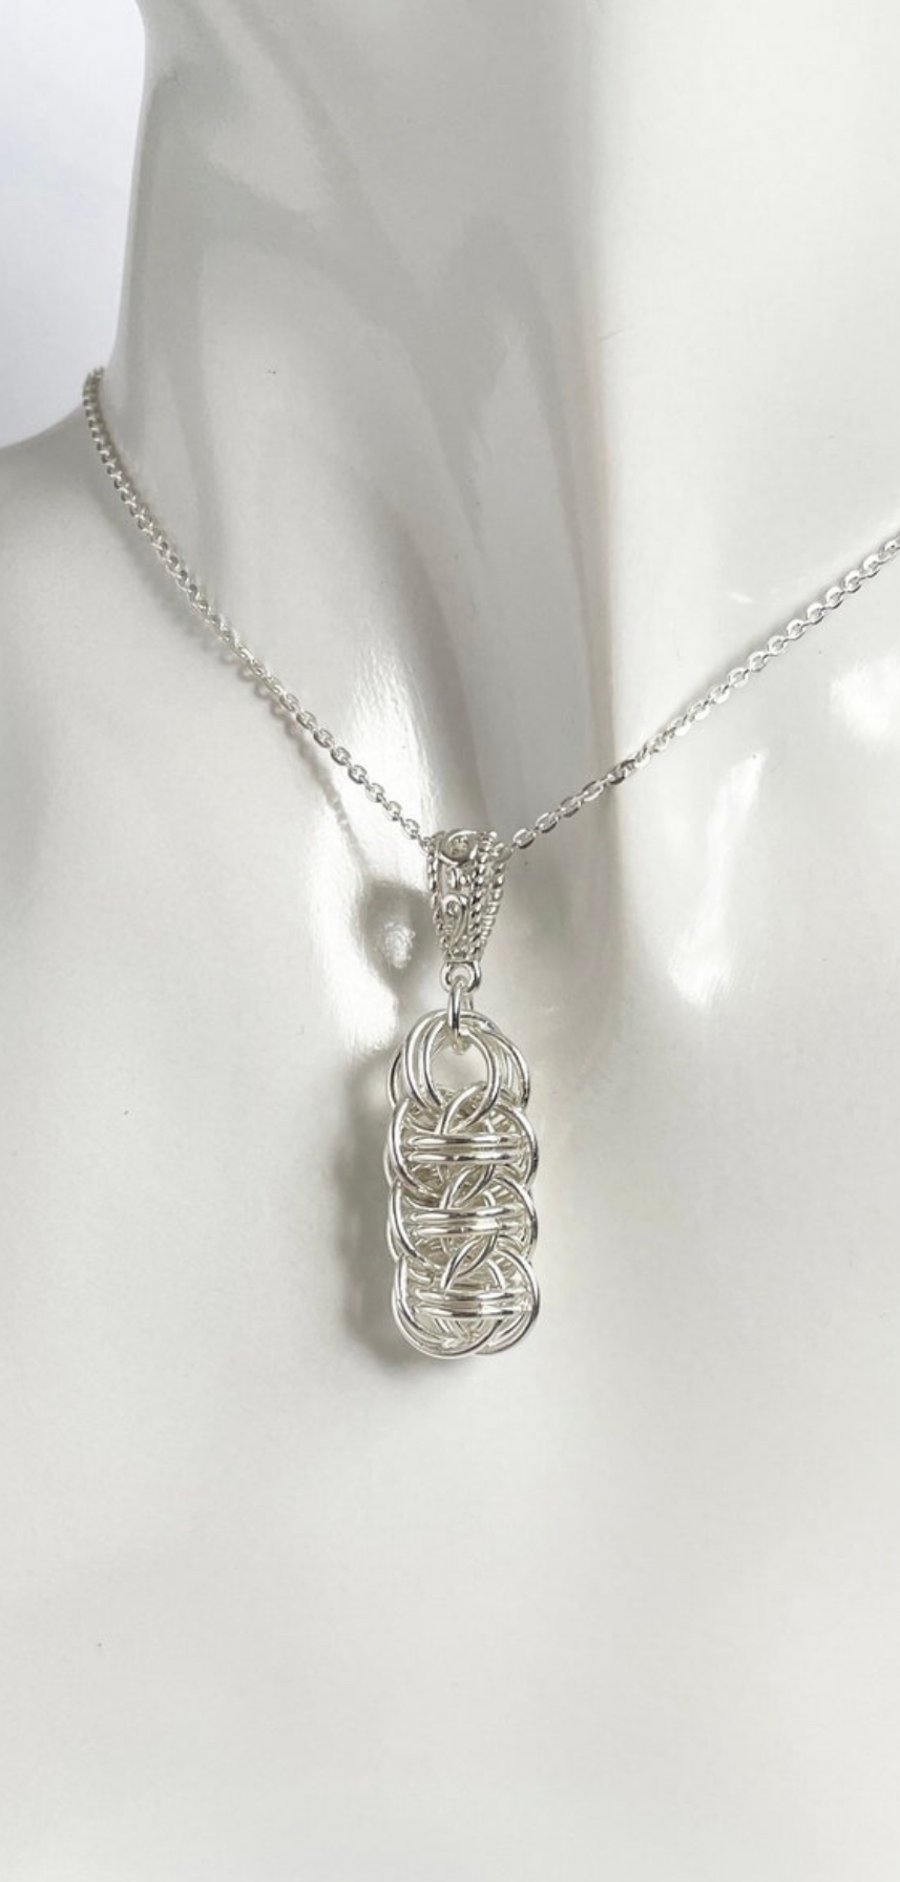 Sterling Silver Chainmaille Pendant with an 18 or 20 Inch Chain